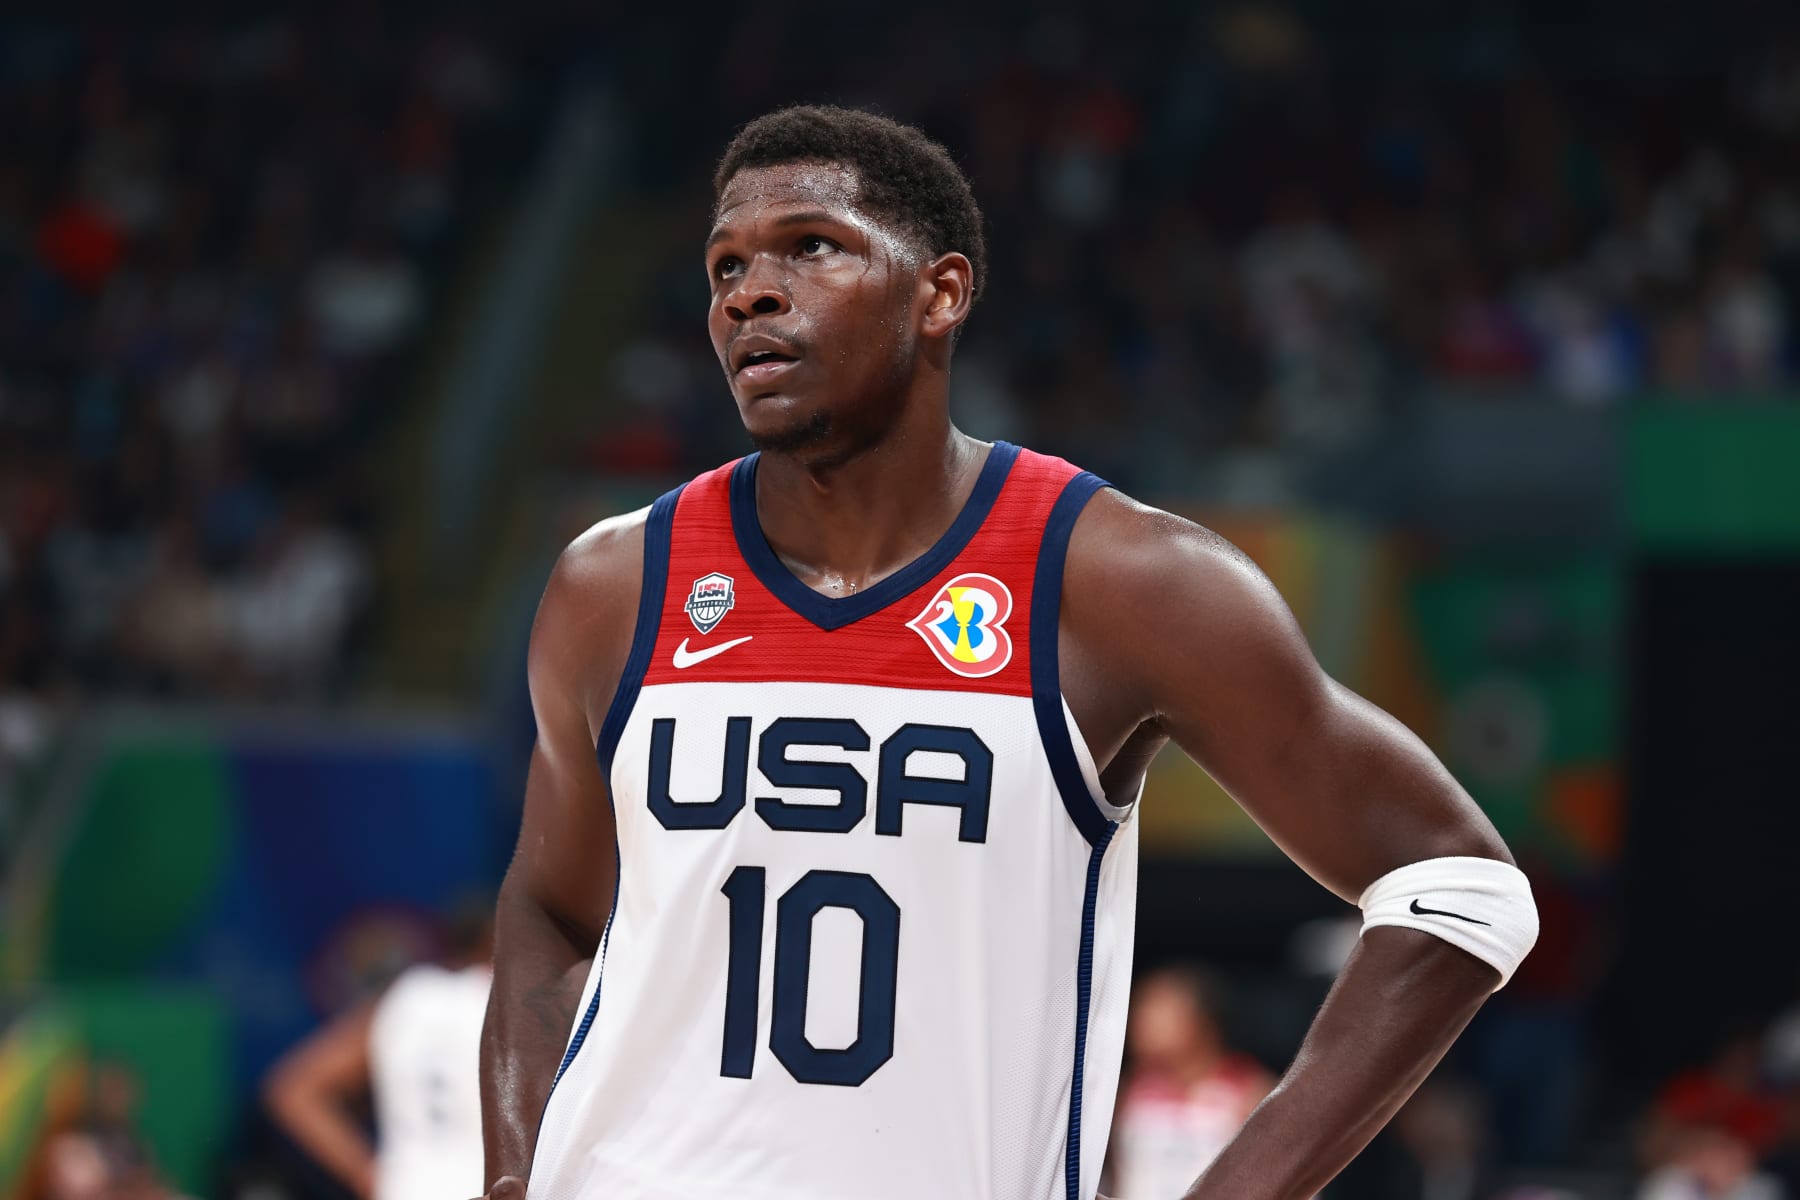 It's not always pretty, but Team USA are one win from another Olympic gold, USA basketball team